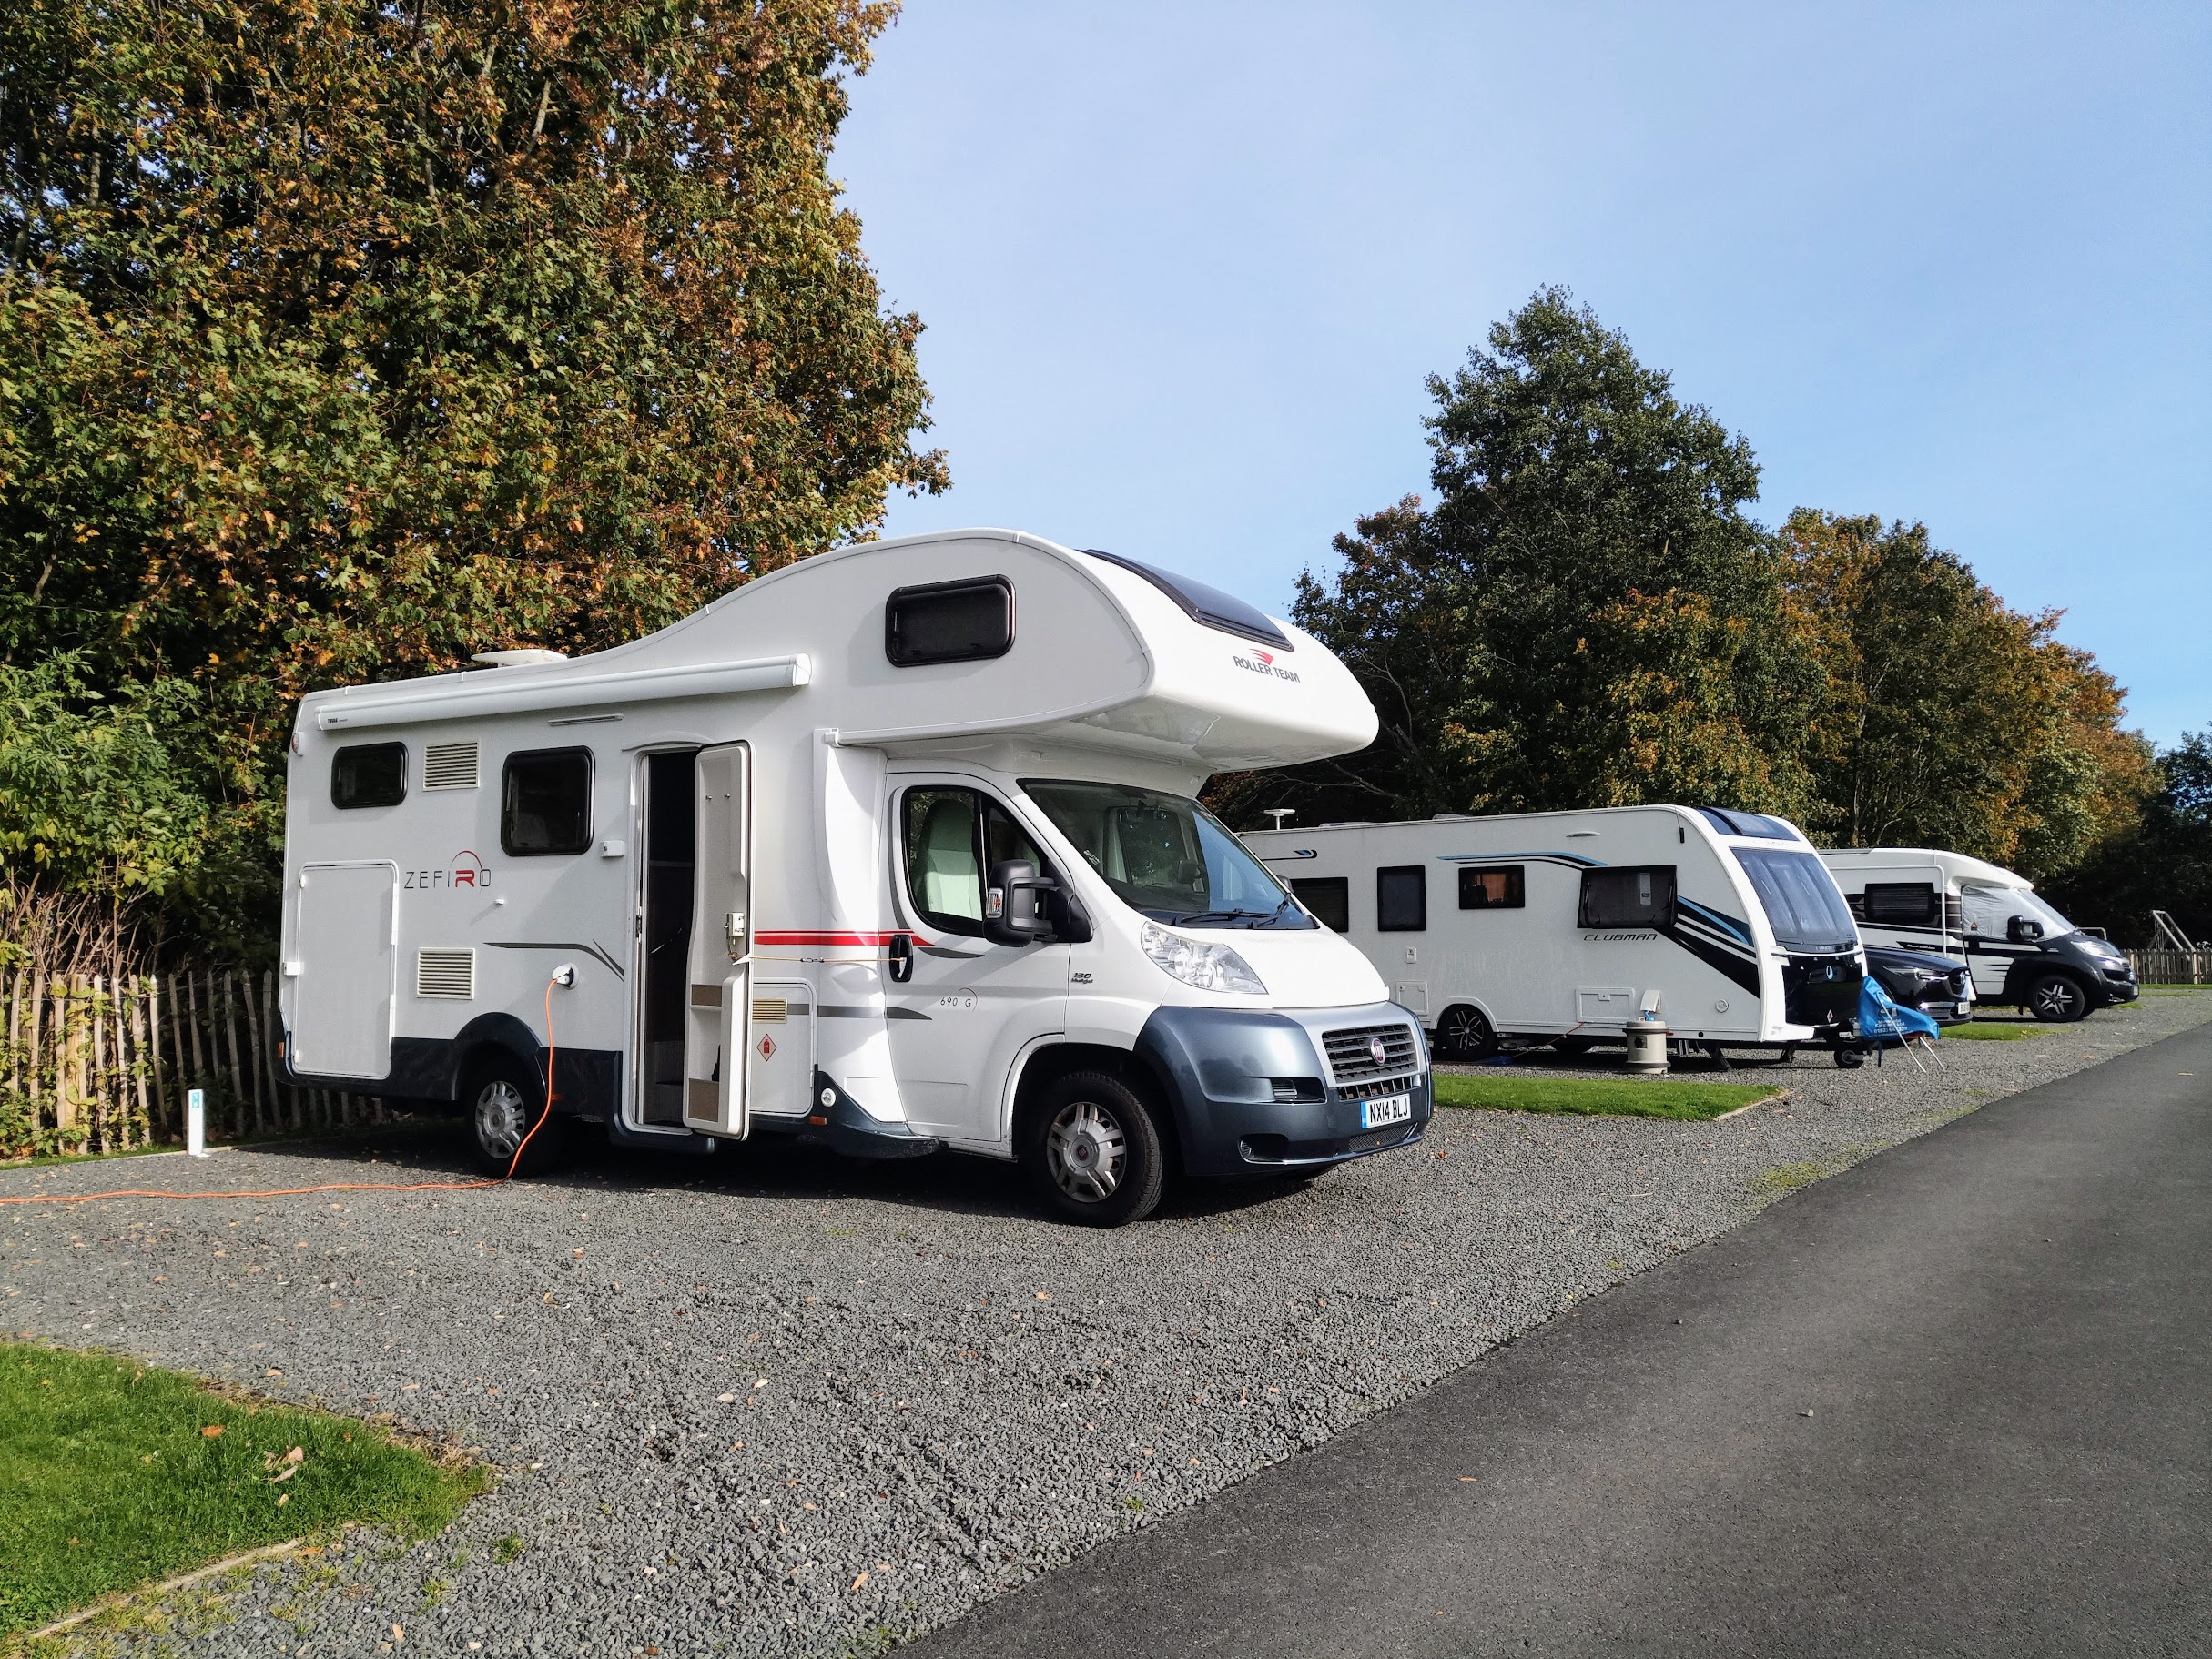 Motorhome pitched up on gravel with electric cable plugged in and caravans on adjacent pitches.